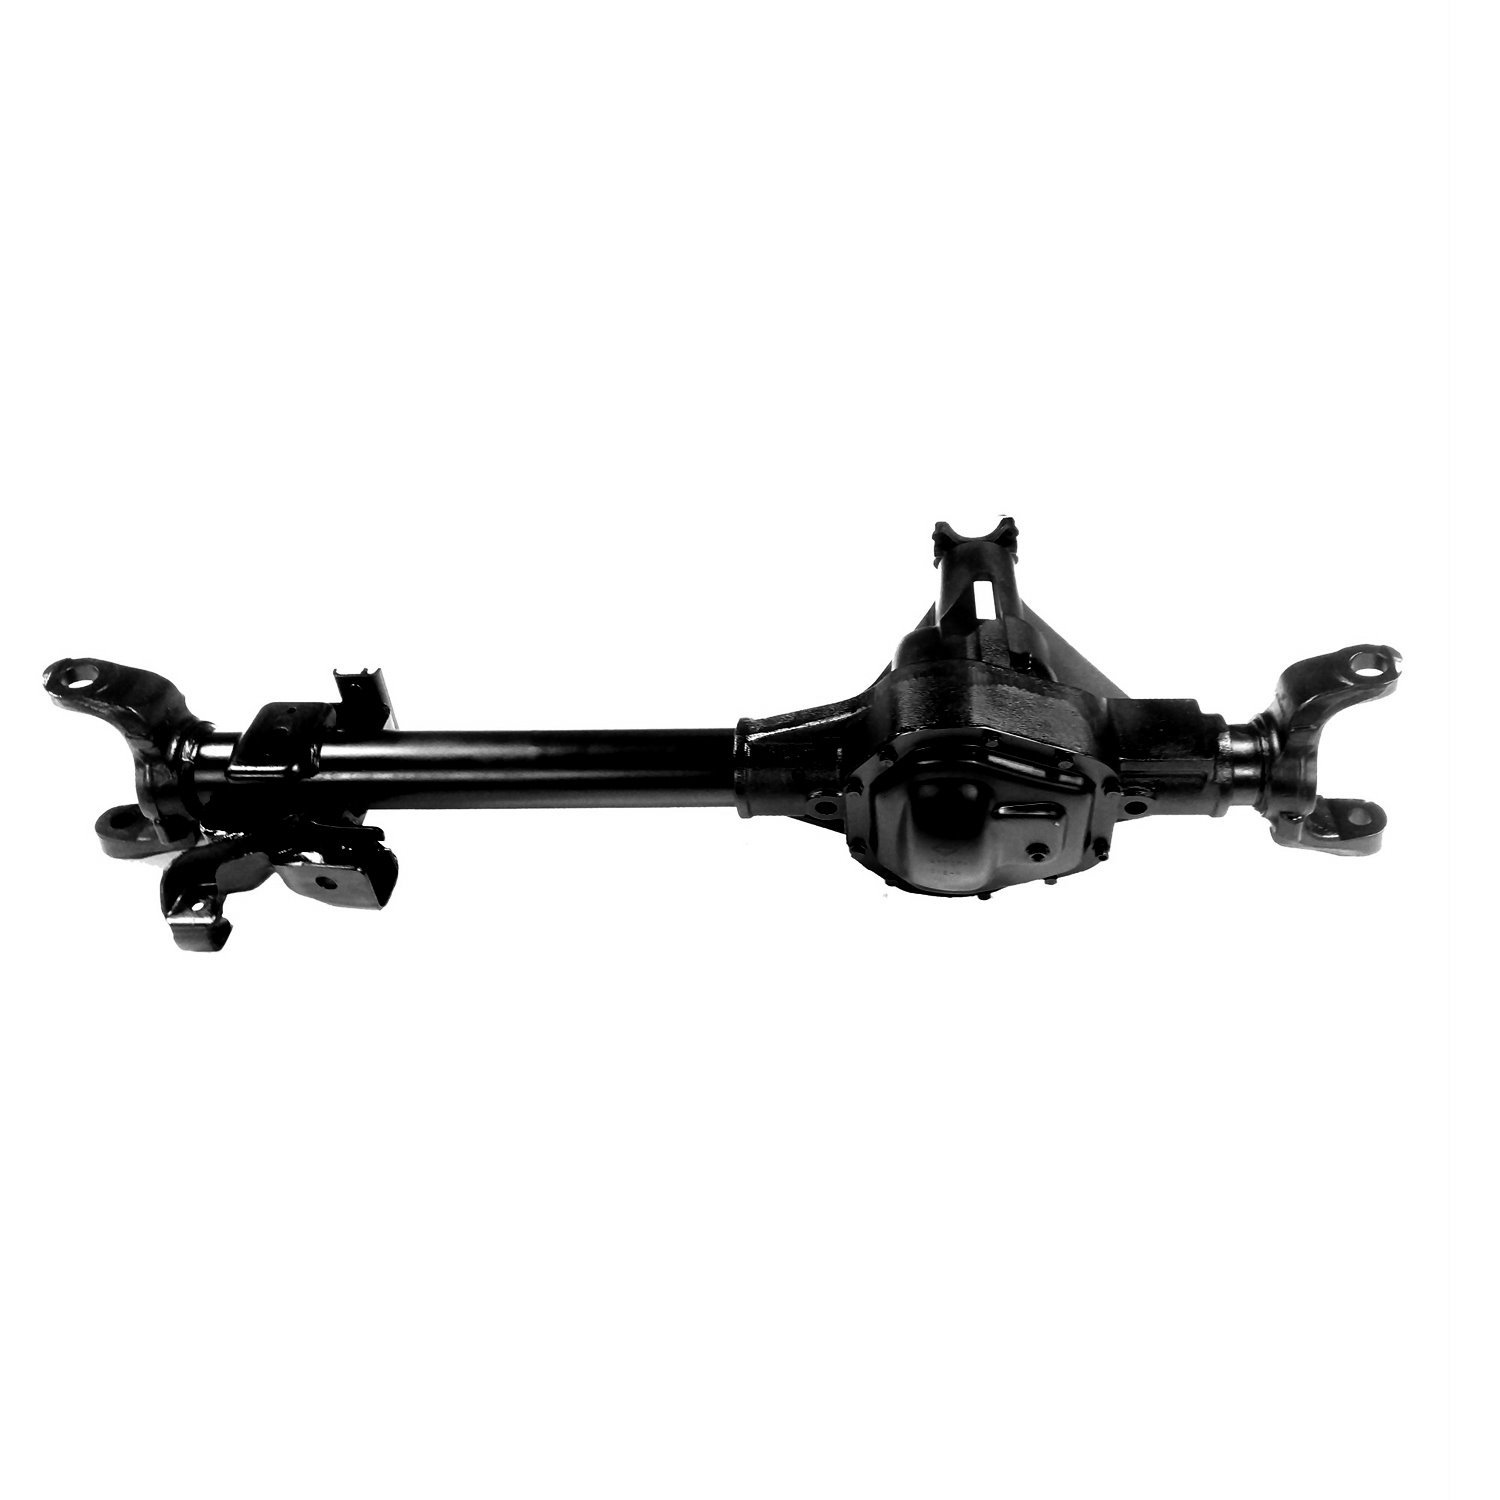 Remanufactured Complete Axle Assembly for Dana 60 05-07 Ford F250 & F350 3.73 Ratio